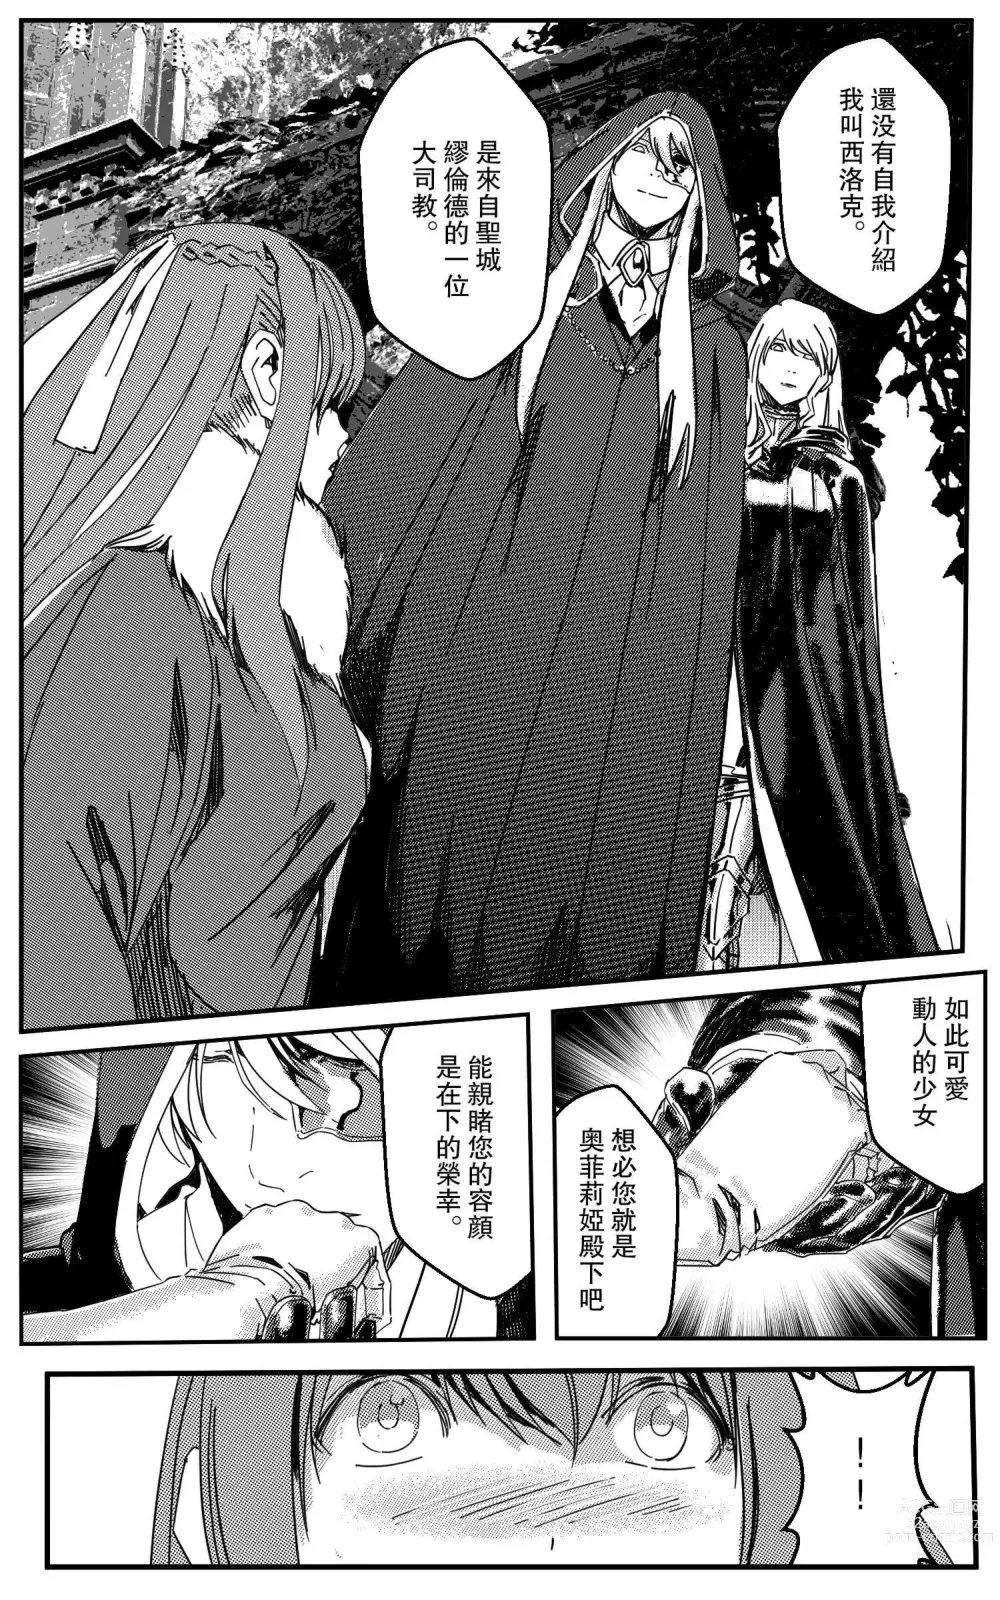 Page 5 of doujinshi 鉄處女/Ironmaiden 01-03（已腰斬）